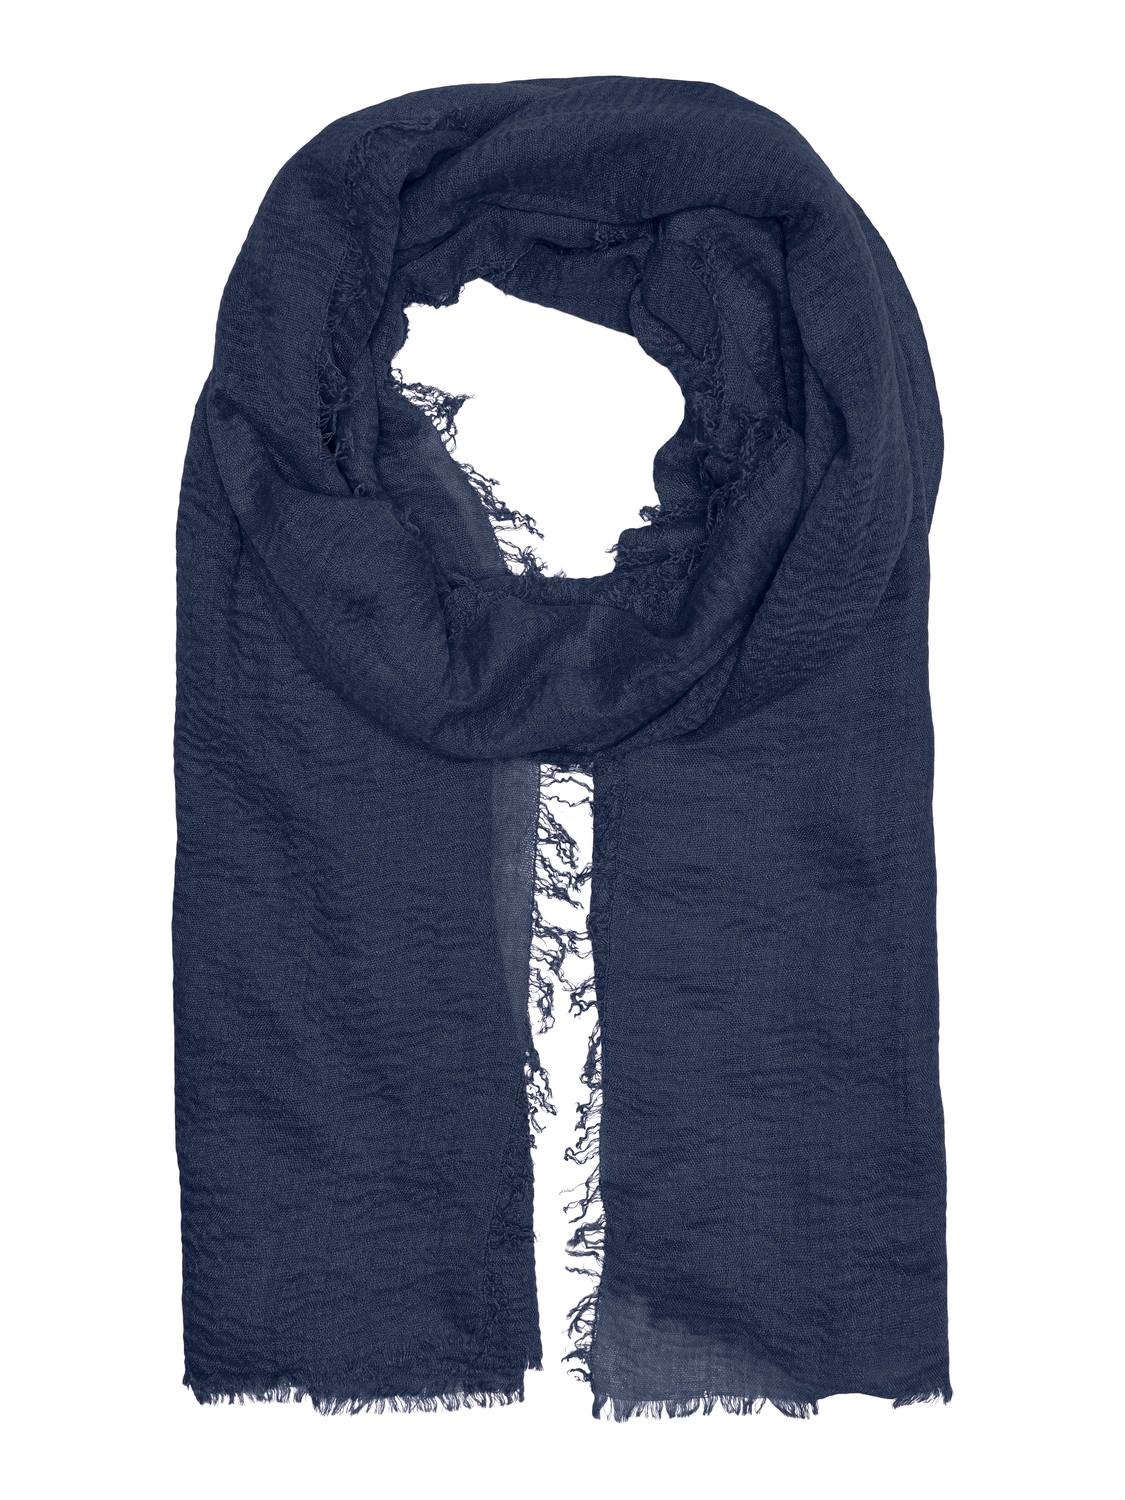 ONLY Scarf -Naval Academy - 15312140